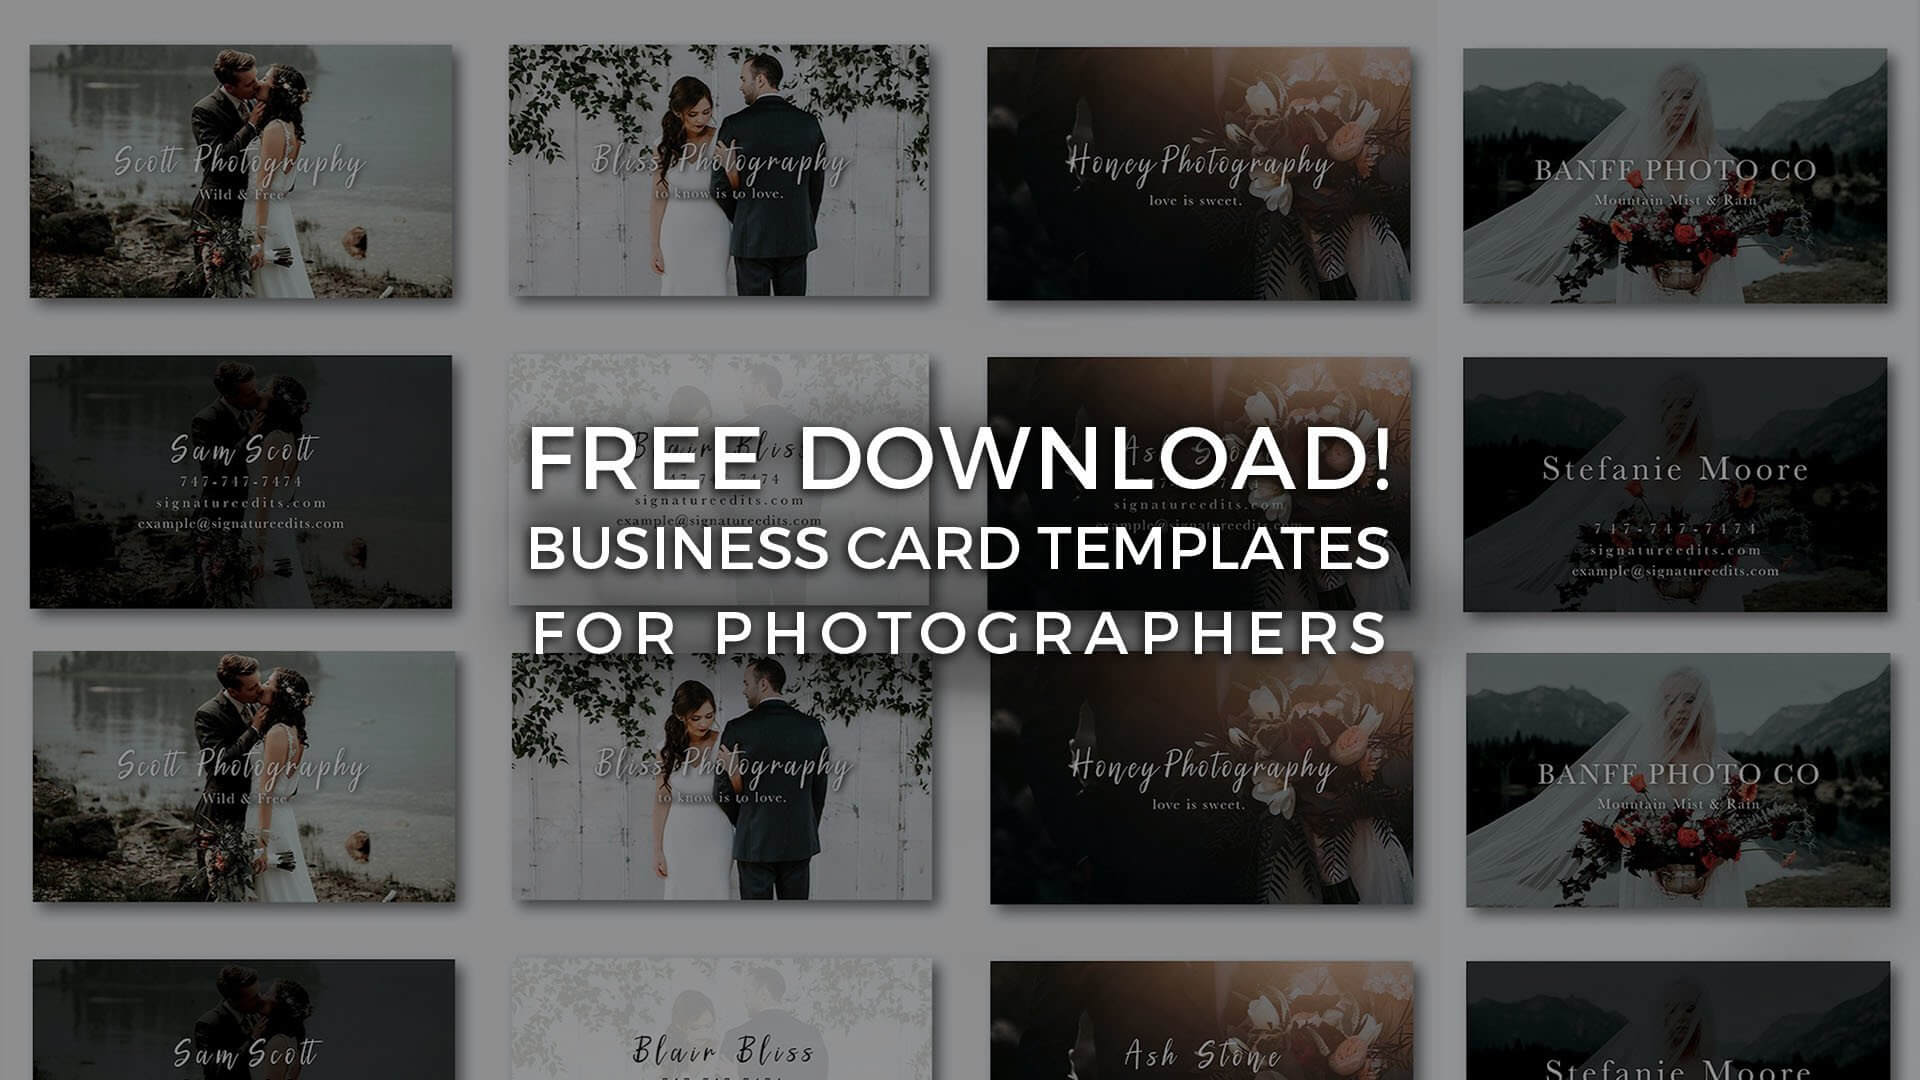 Free Photographer Business Card Templates! - Signature Edits Inside Photography Business Card Templates Free Download